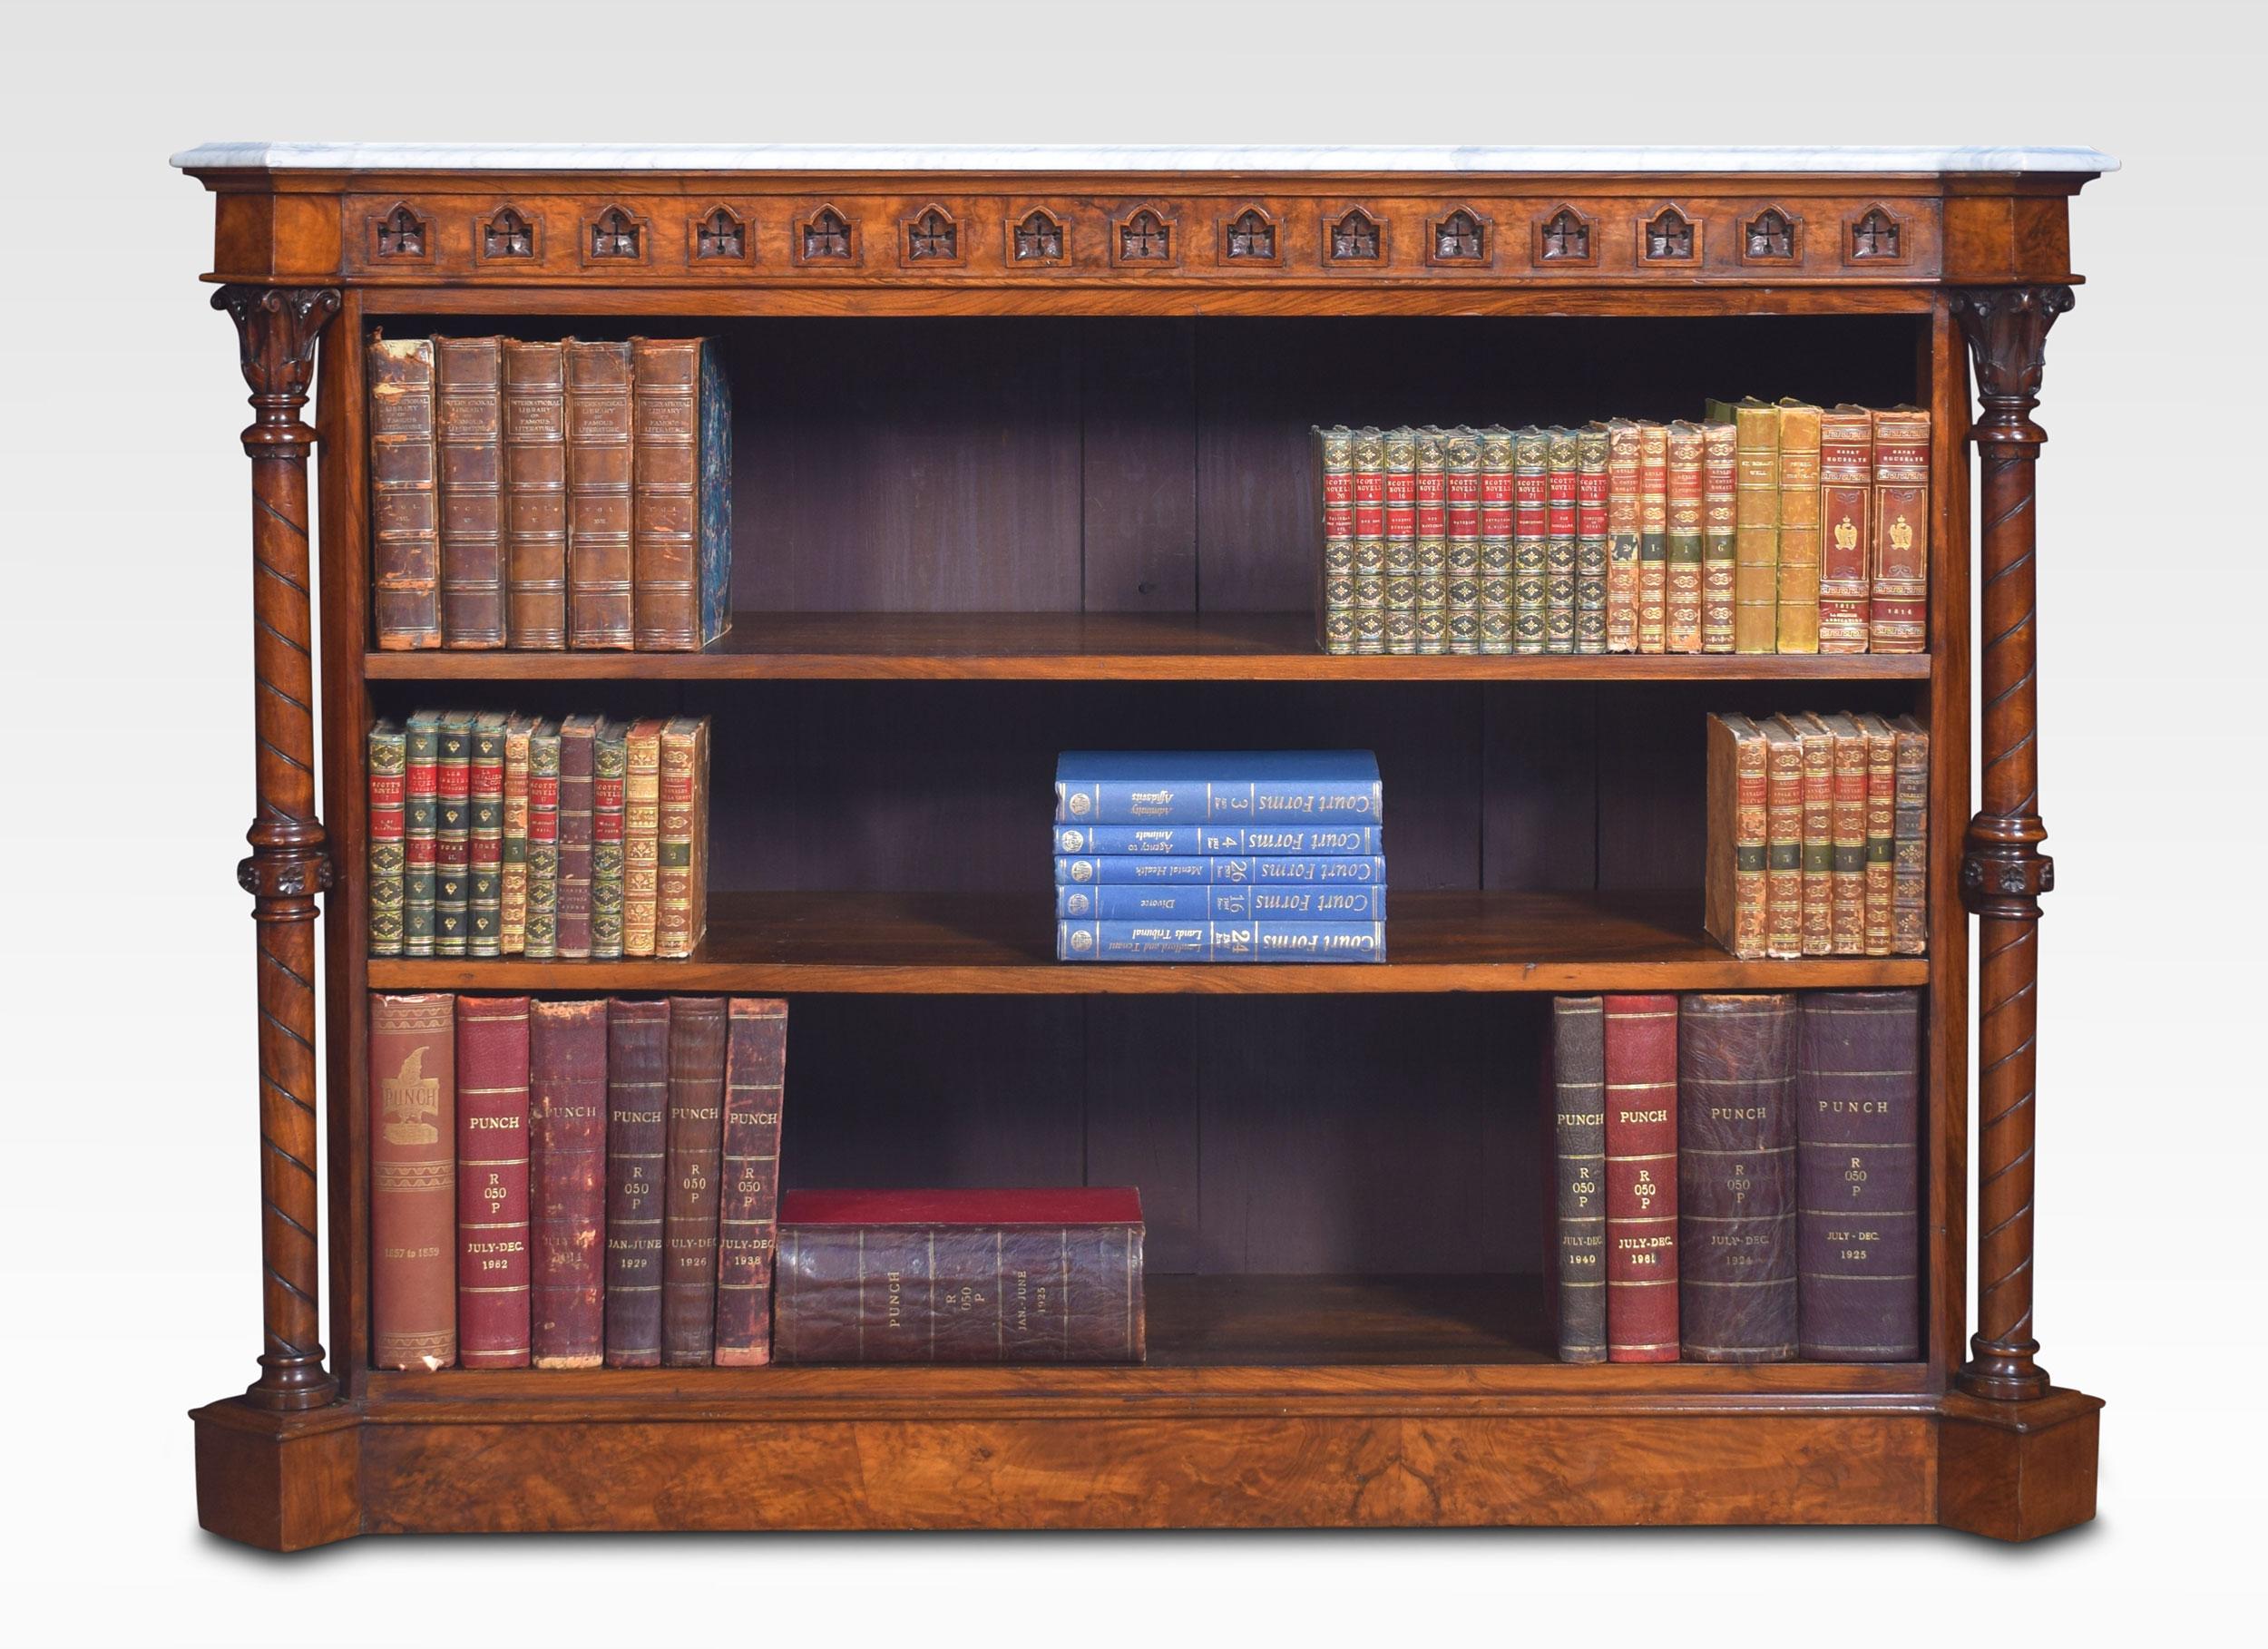 Gothic revival walnut open bookcase, the large rectangular white veined marble top with canted corners above a pierced ecclesiastical frieze. Supported on circular columns with carved capitals, enclosing two adjustable shelves. All raised up on